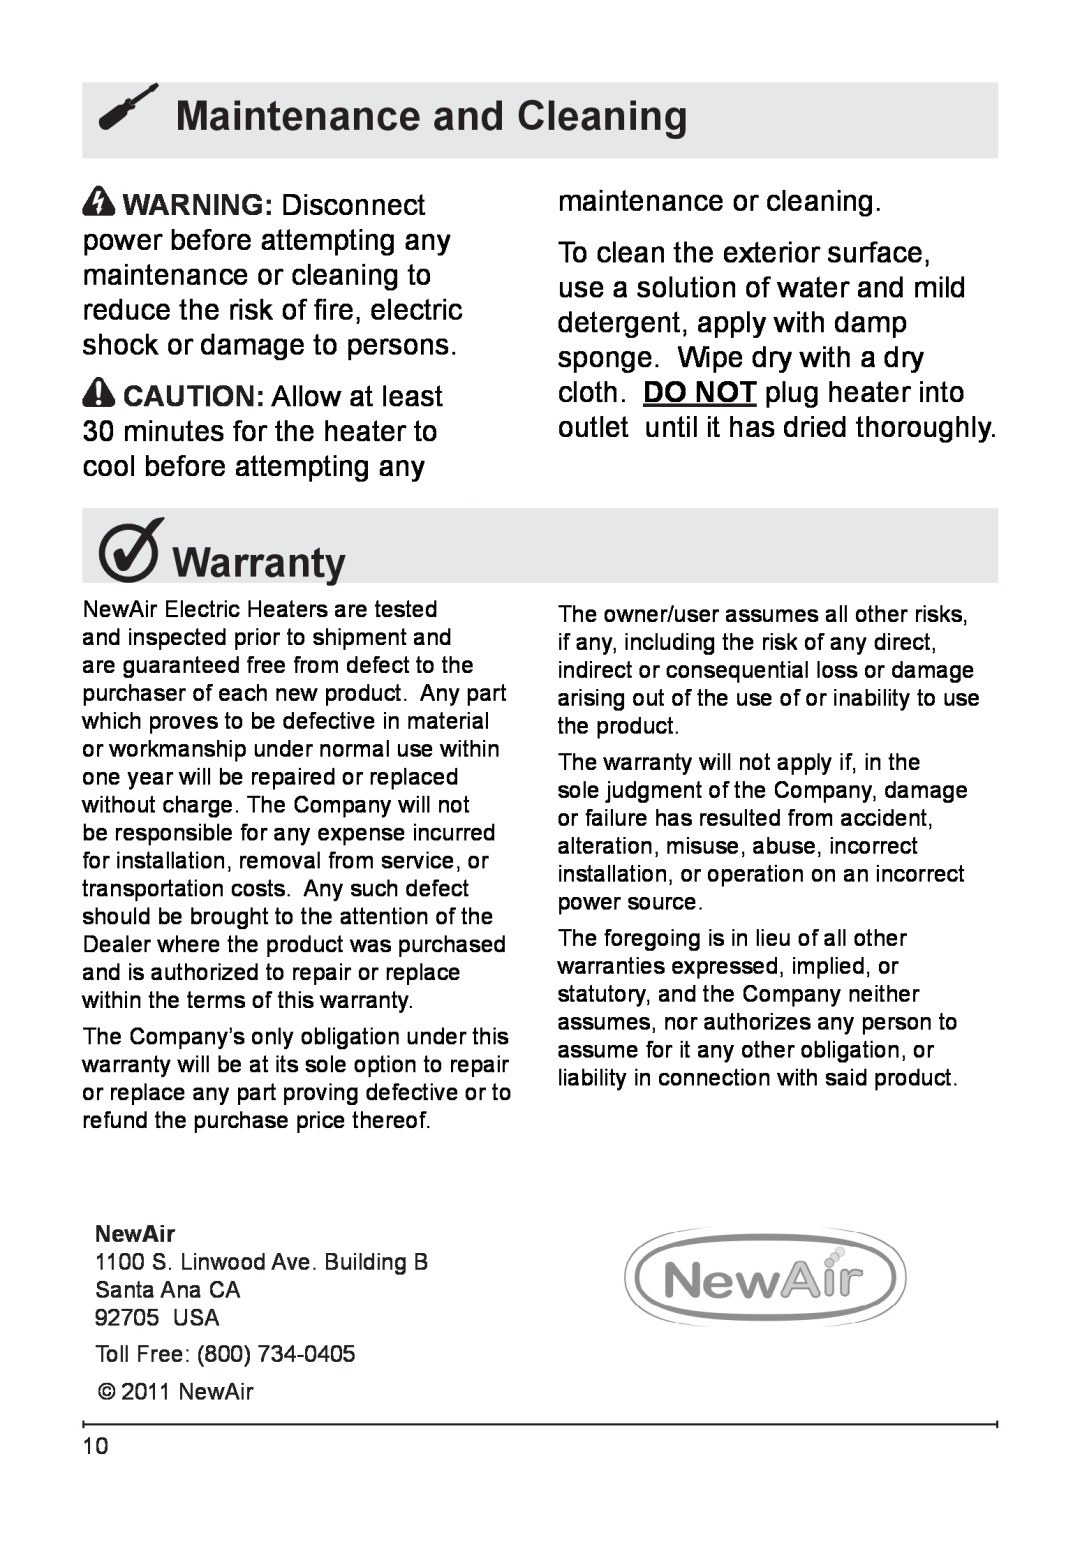 NewAir G70 owner manual Maintenance and Cleaning, Warranty 